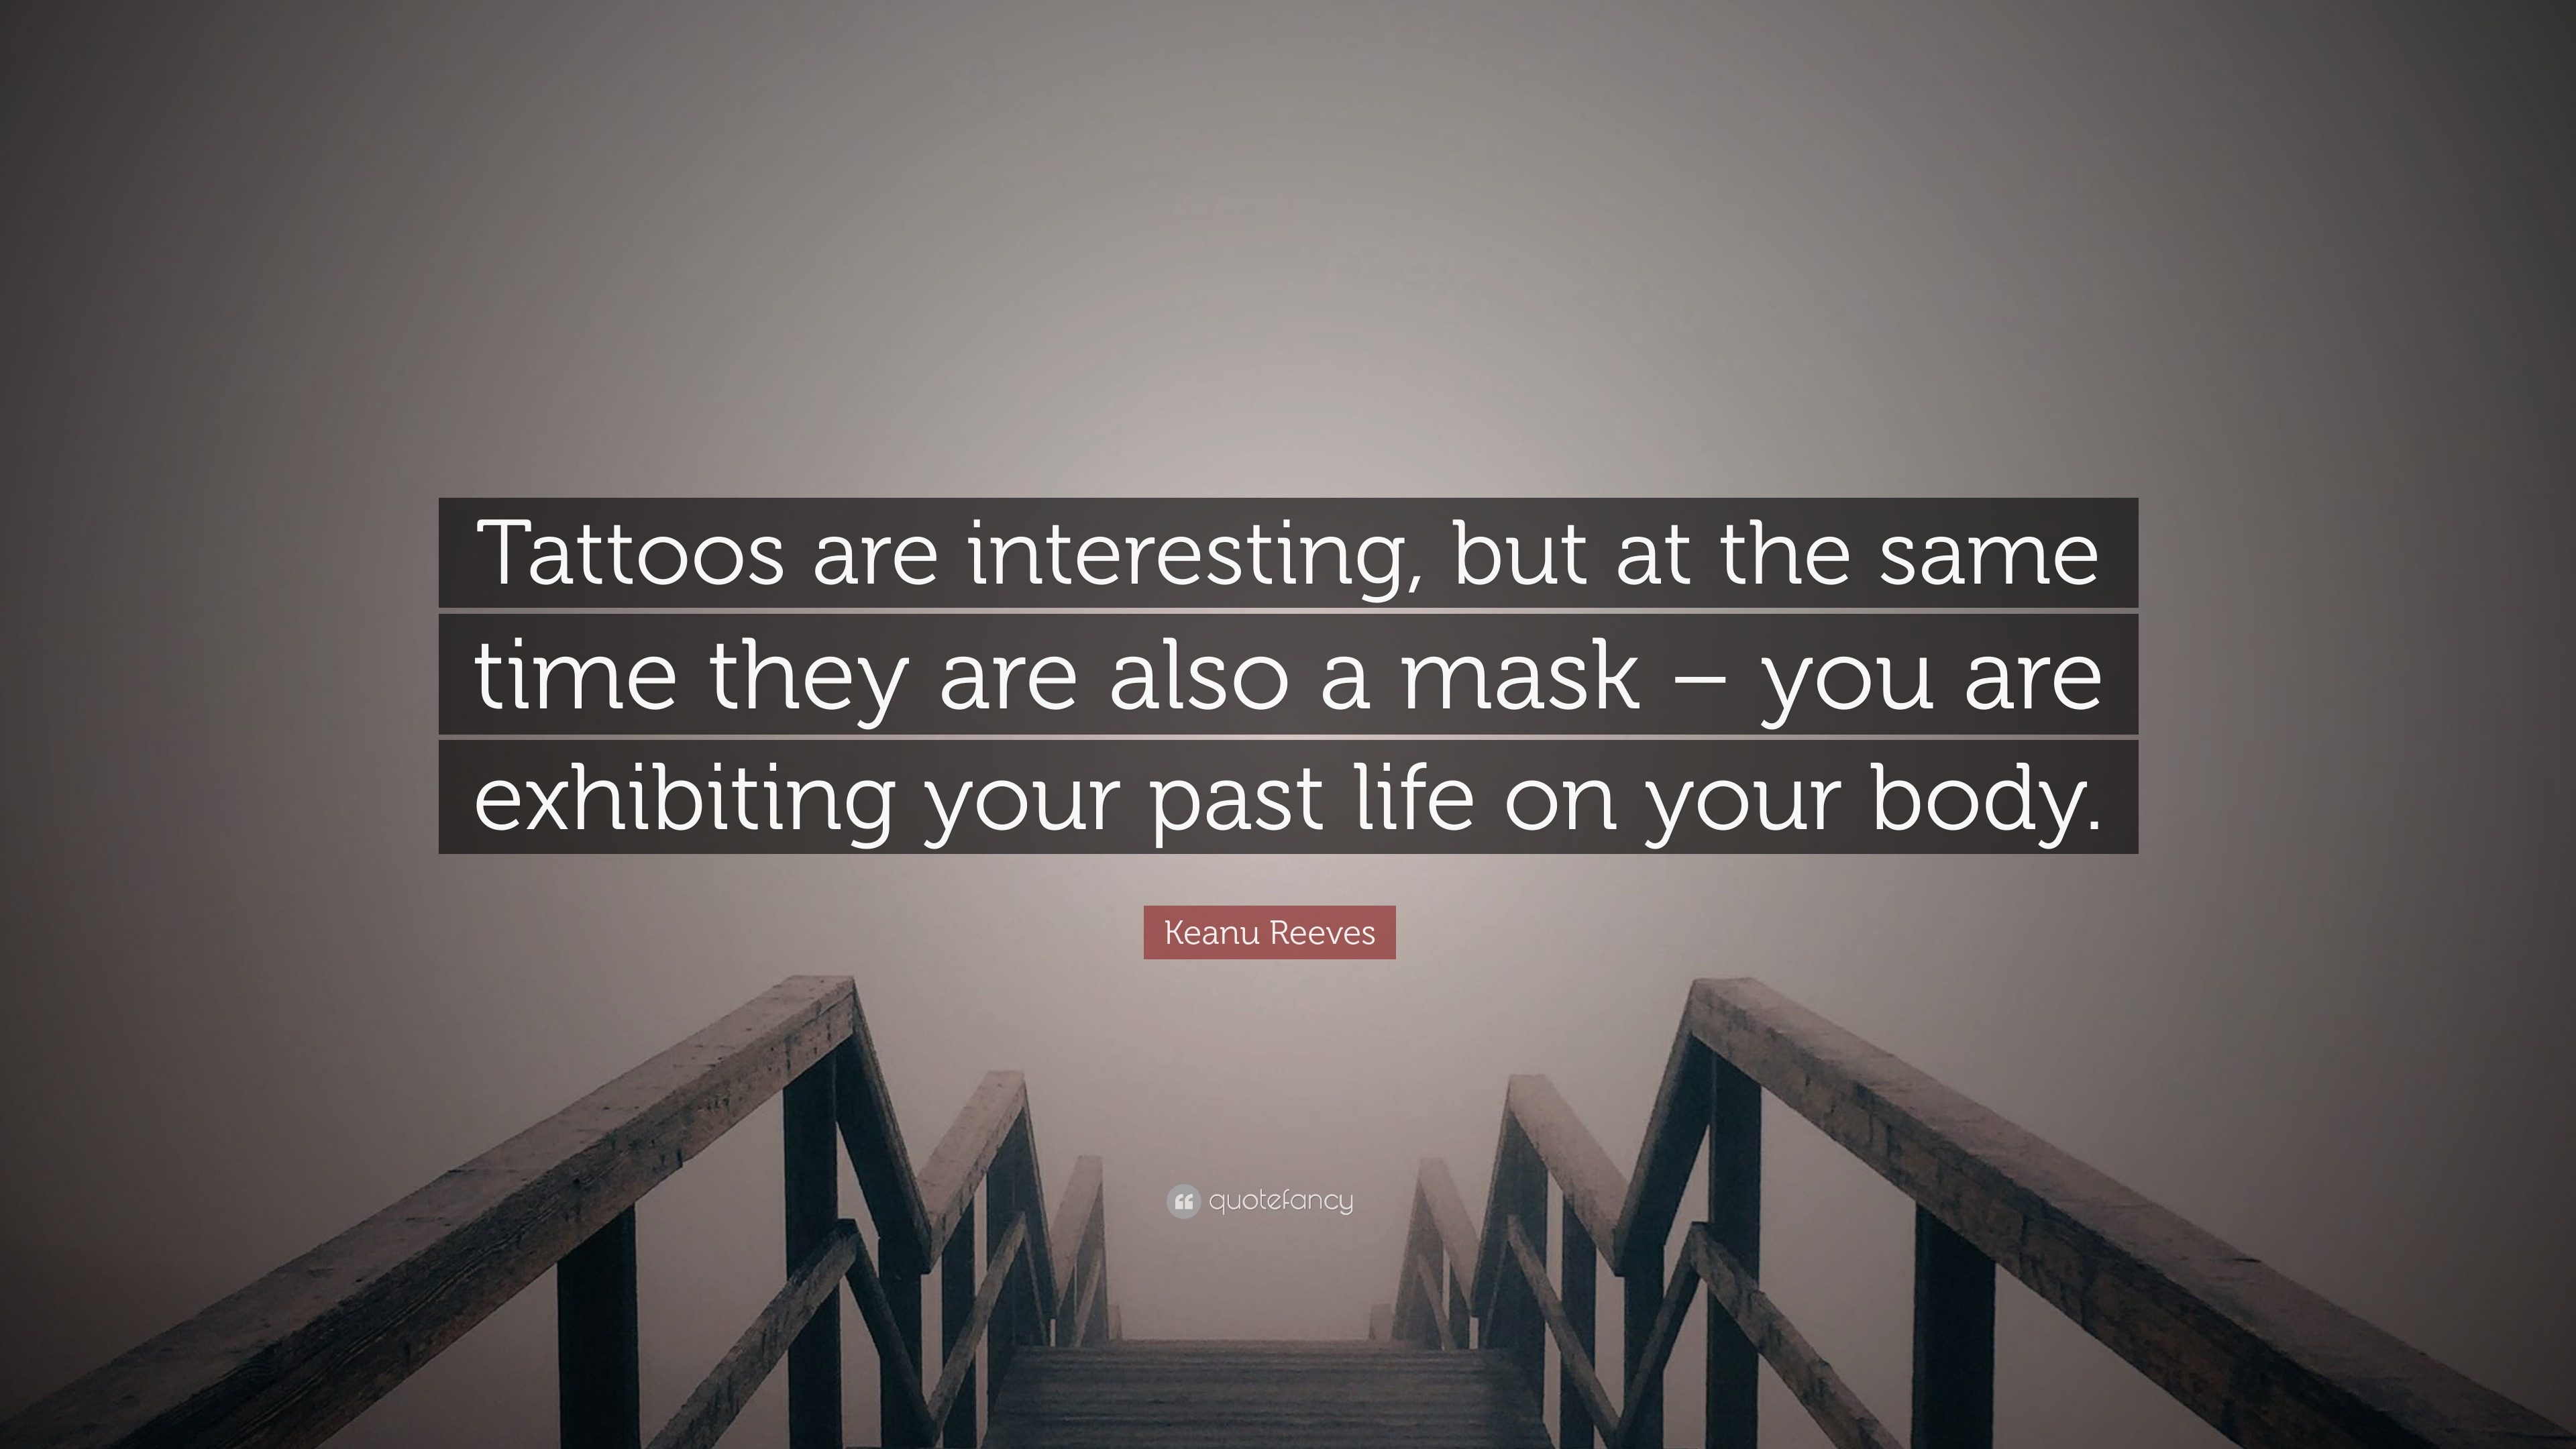 The Best Inspirational Tattoo Quotes · Part II - YouTube